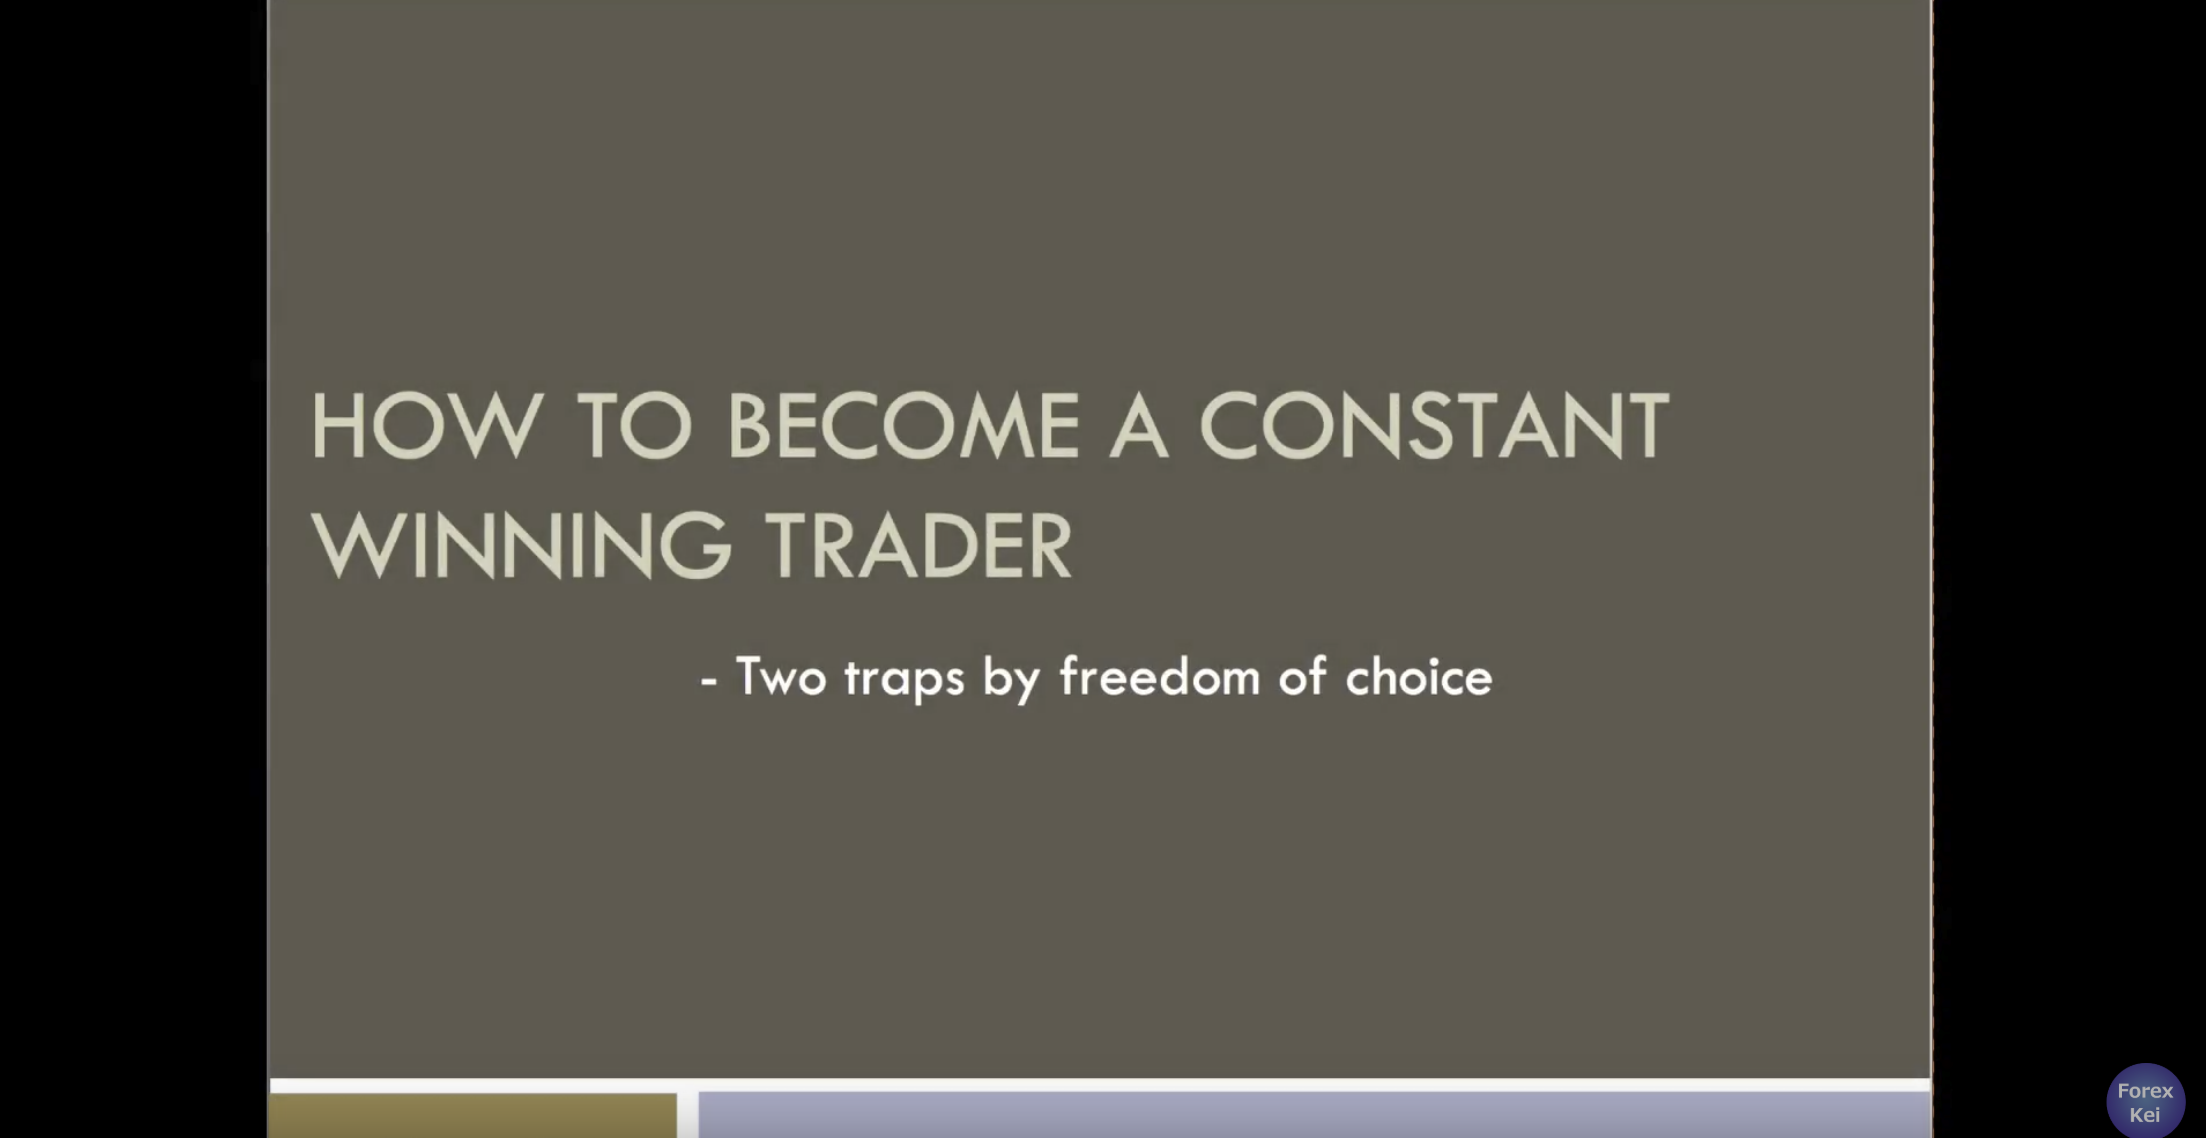 How to become a constant winning trader – Two traps by freedom of choice